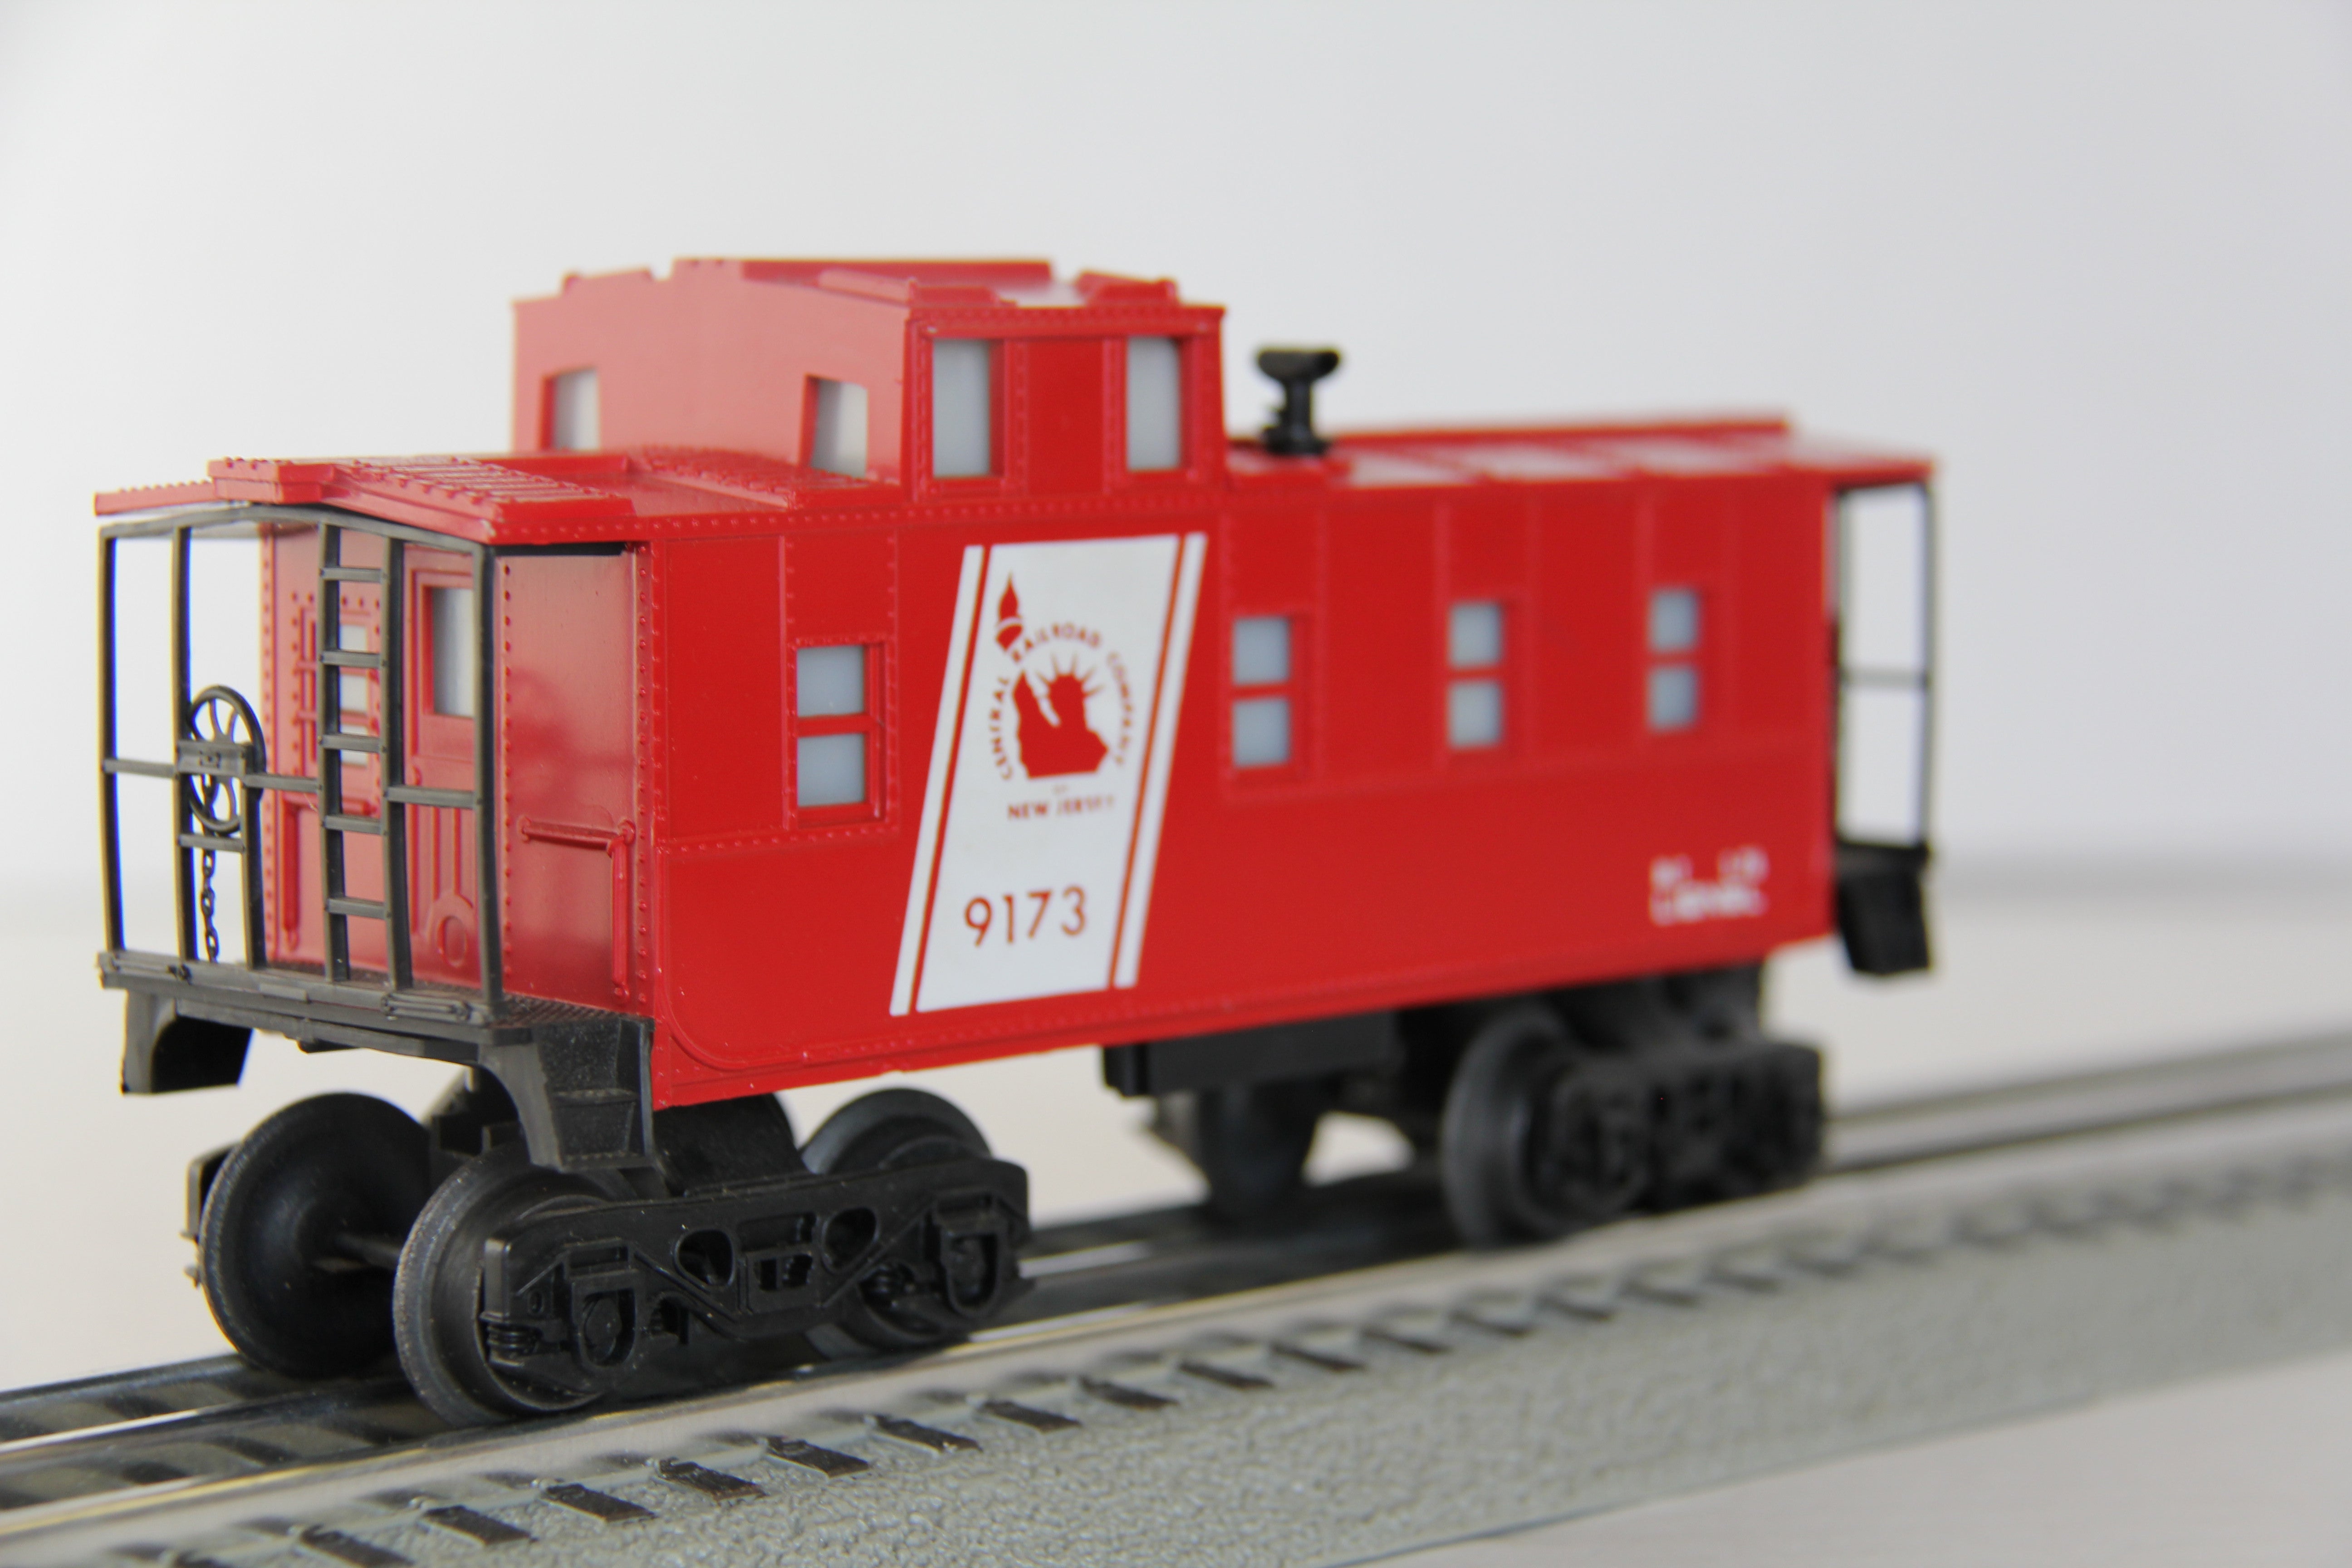 Lionel 6-9173 Jersey Central Lighted Caboose-Second hand-M4033